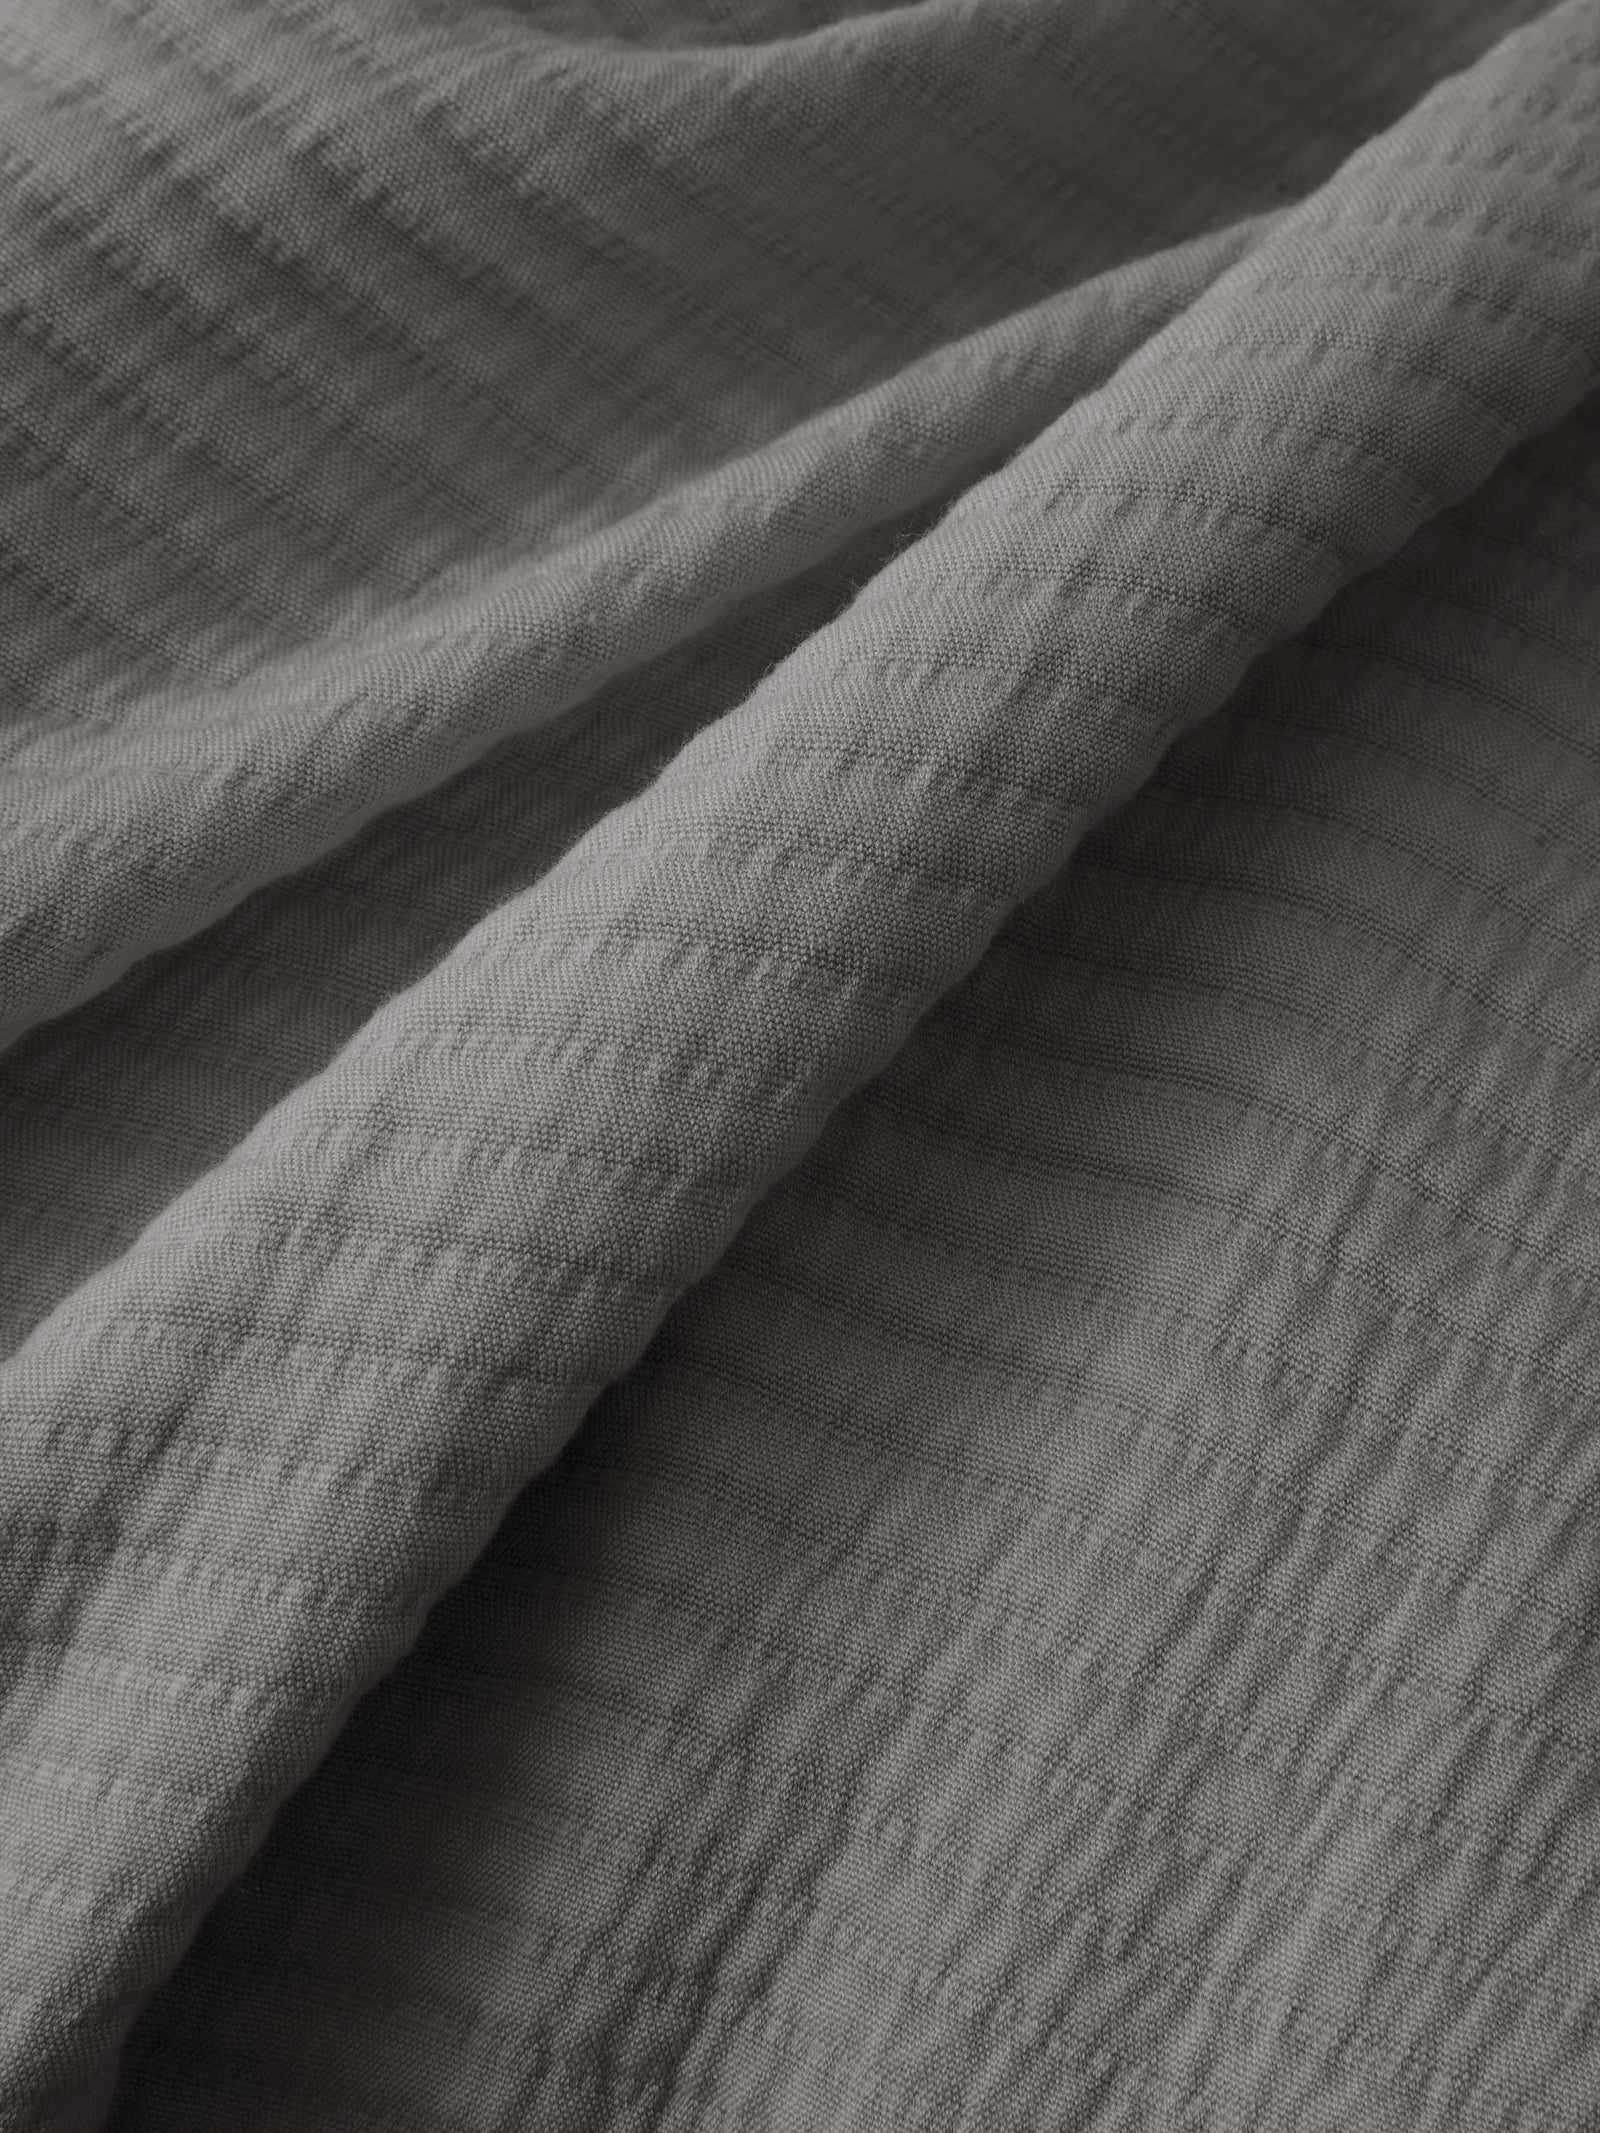 Close up of charcoal coverlet fabric 